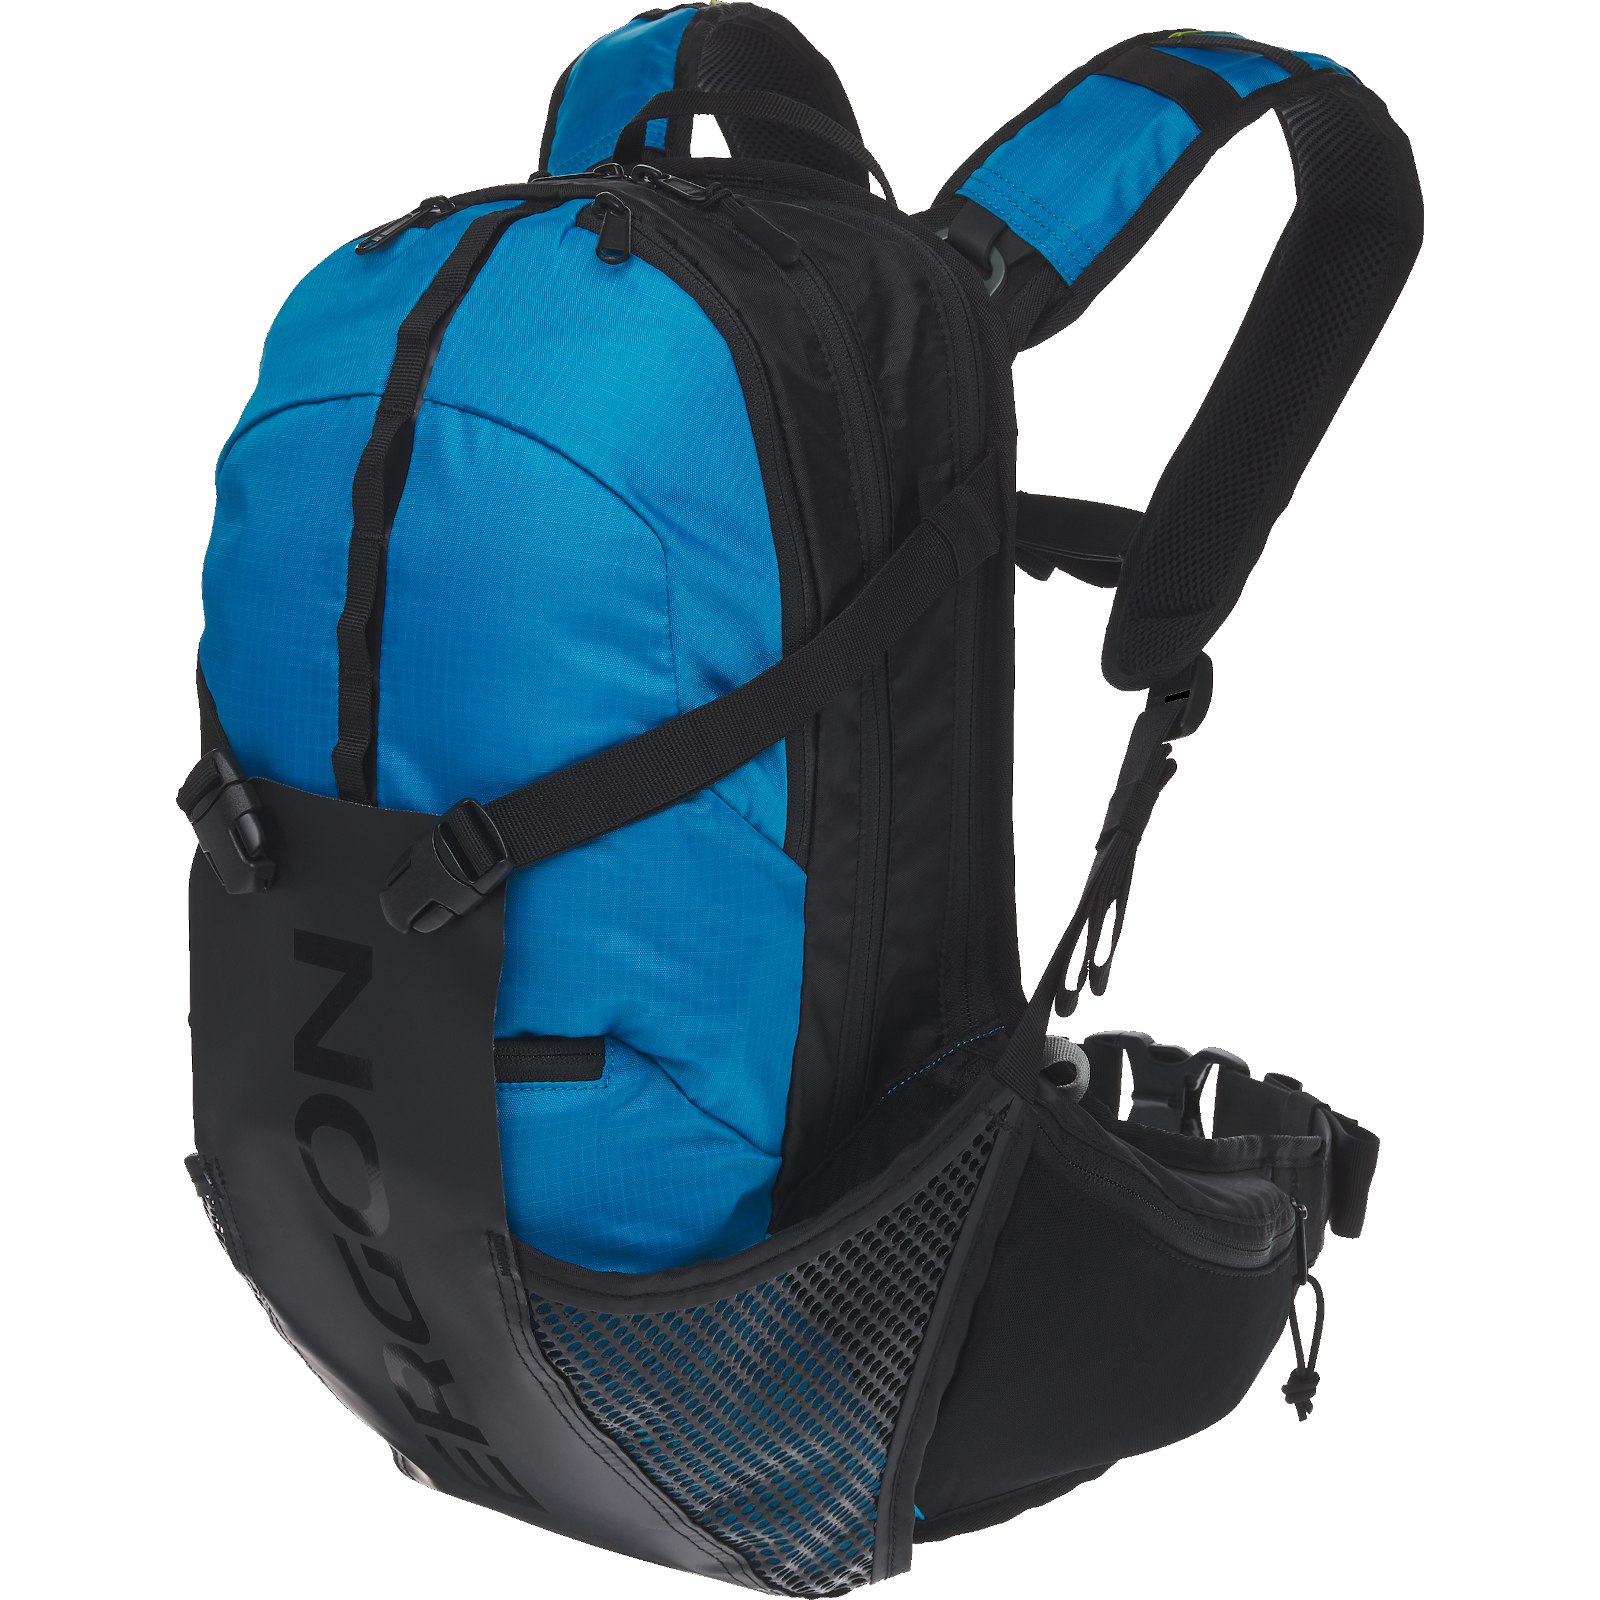 Picture of Ergon BX3 Evo Backpack - blue